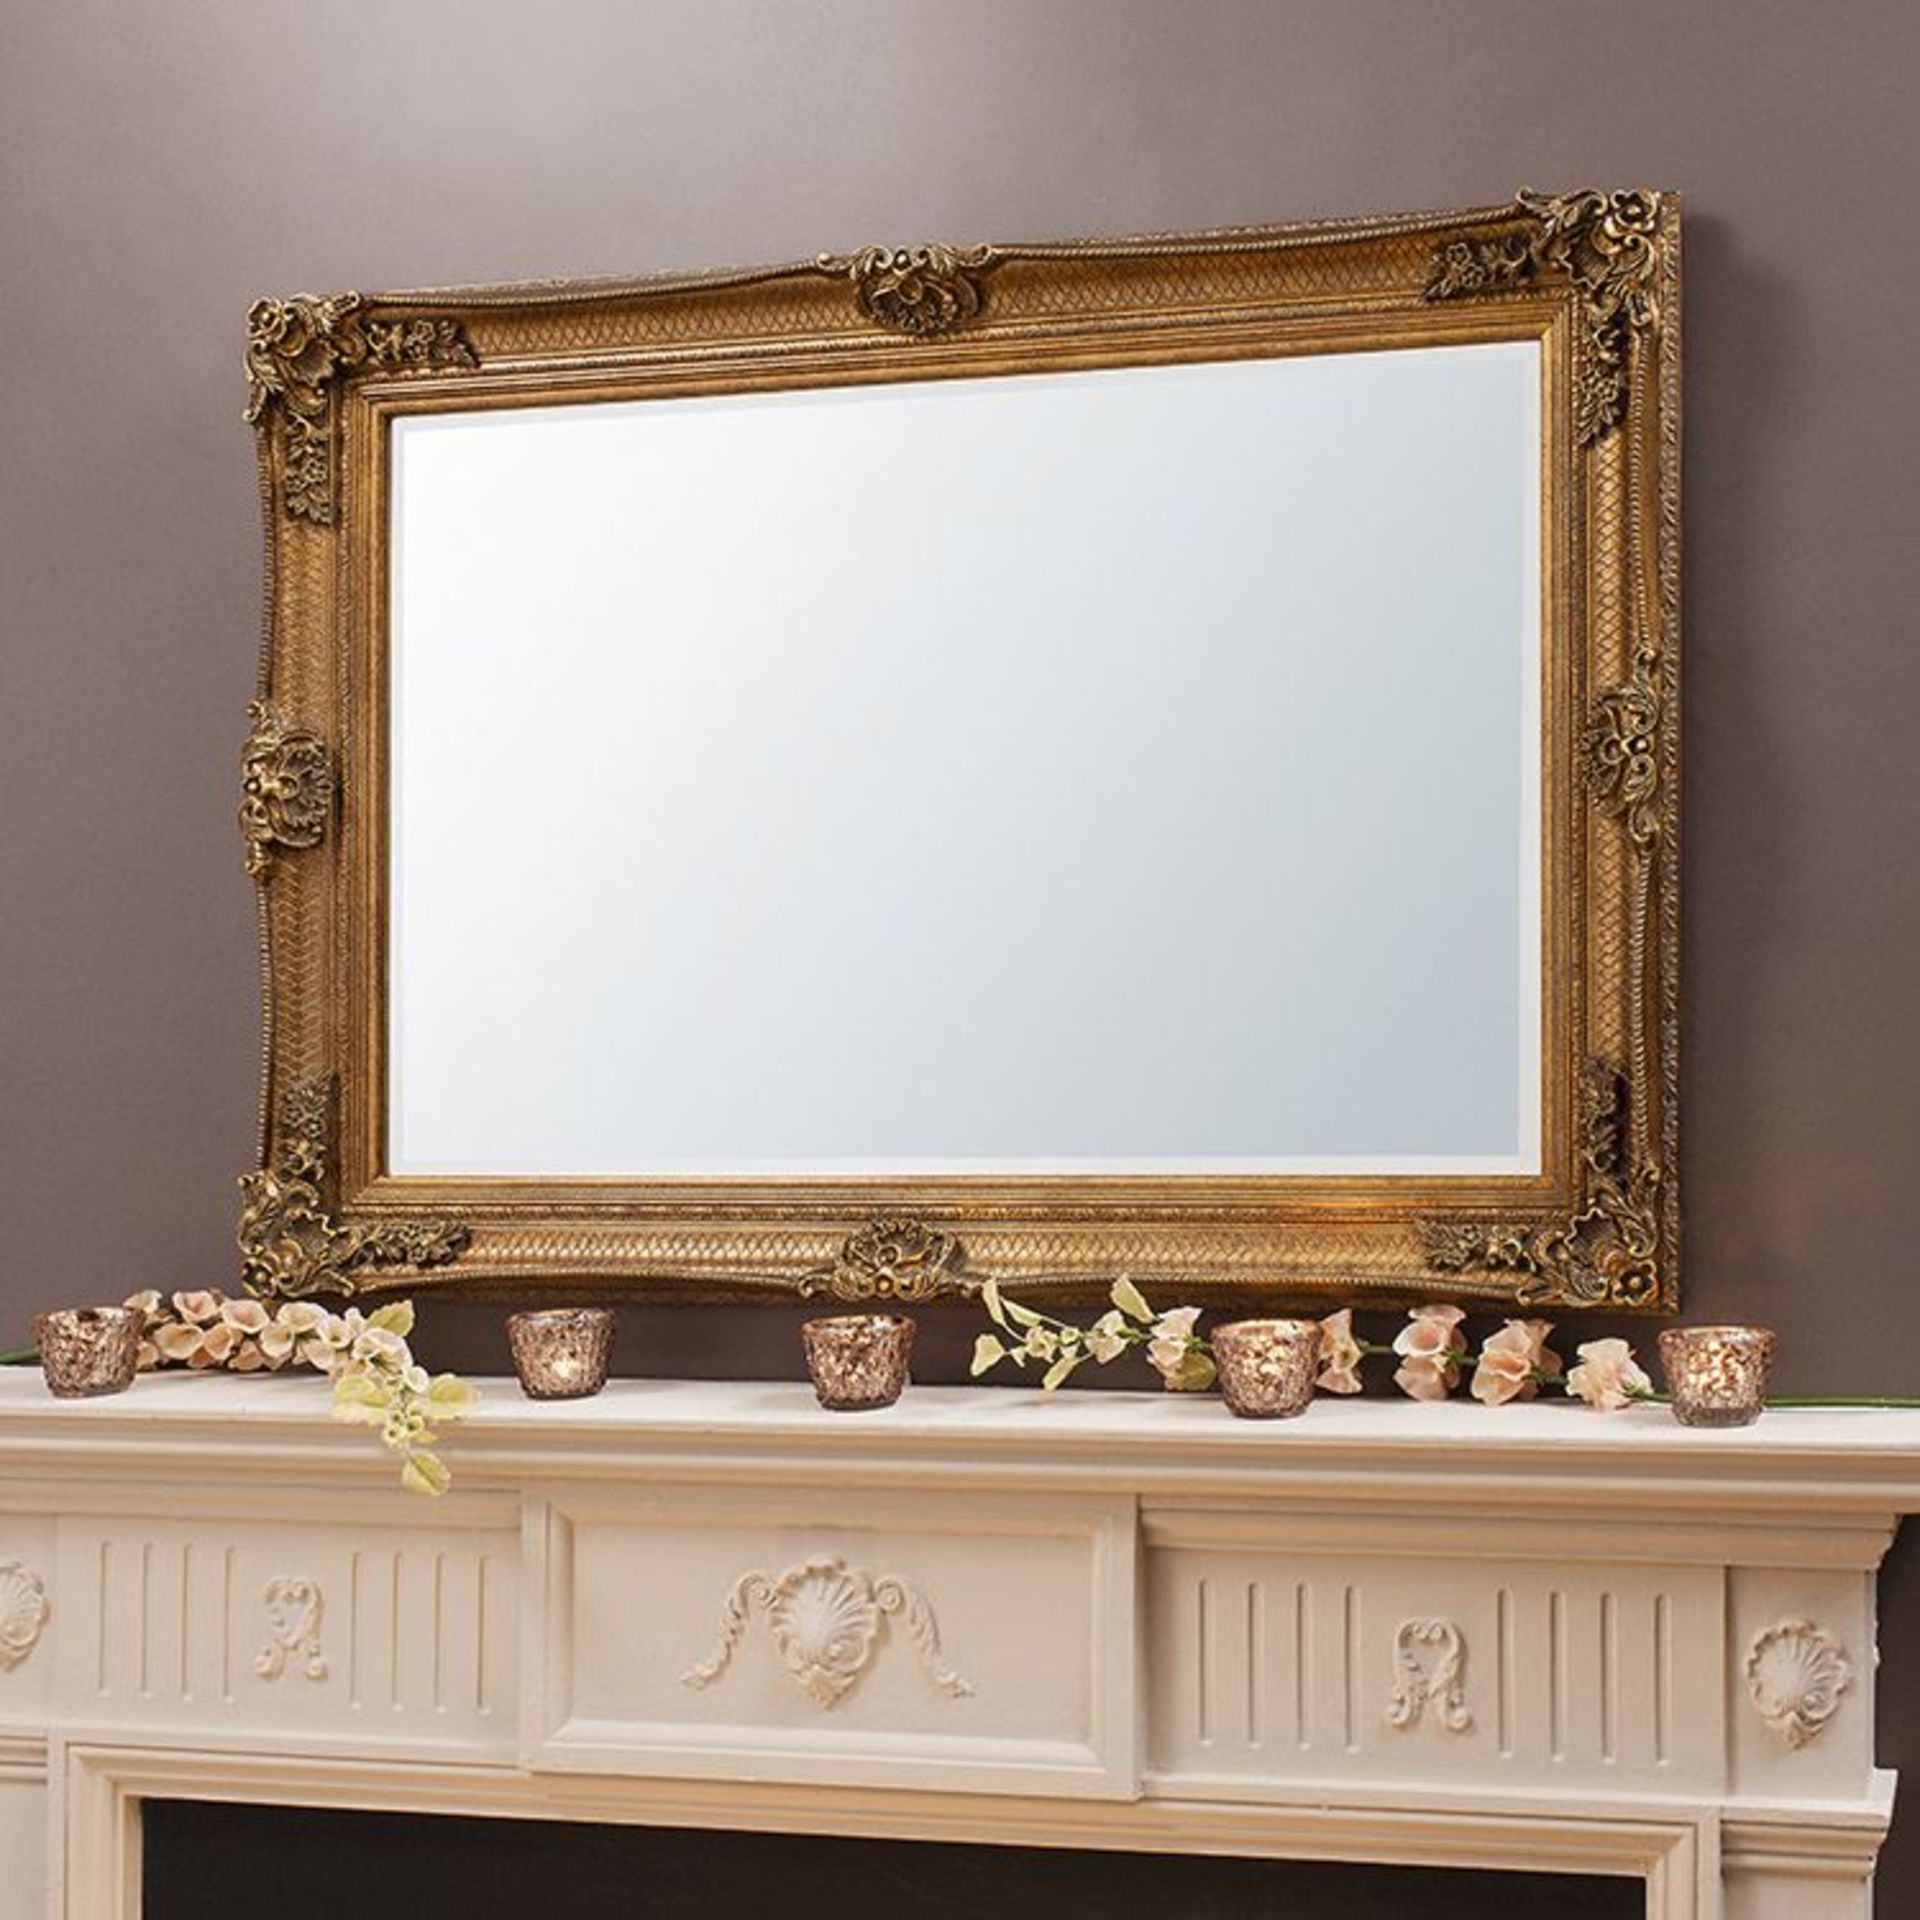 Abbey Rectangle Mirror Gold This Beautiful Vintage Abbey Rectangular Mirror Exudes Elegance And